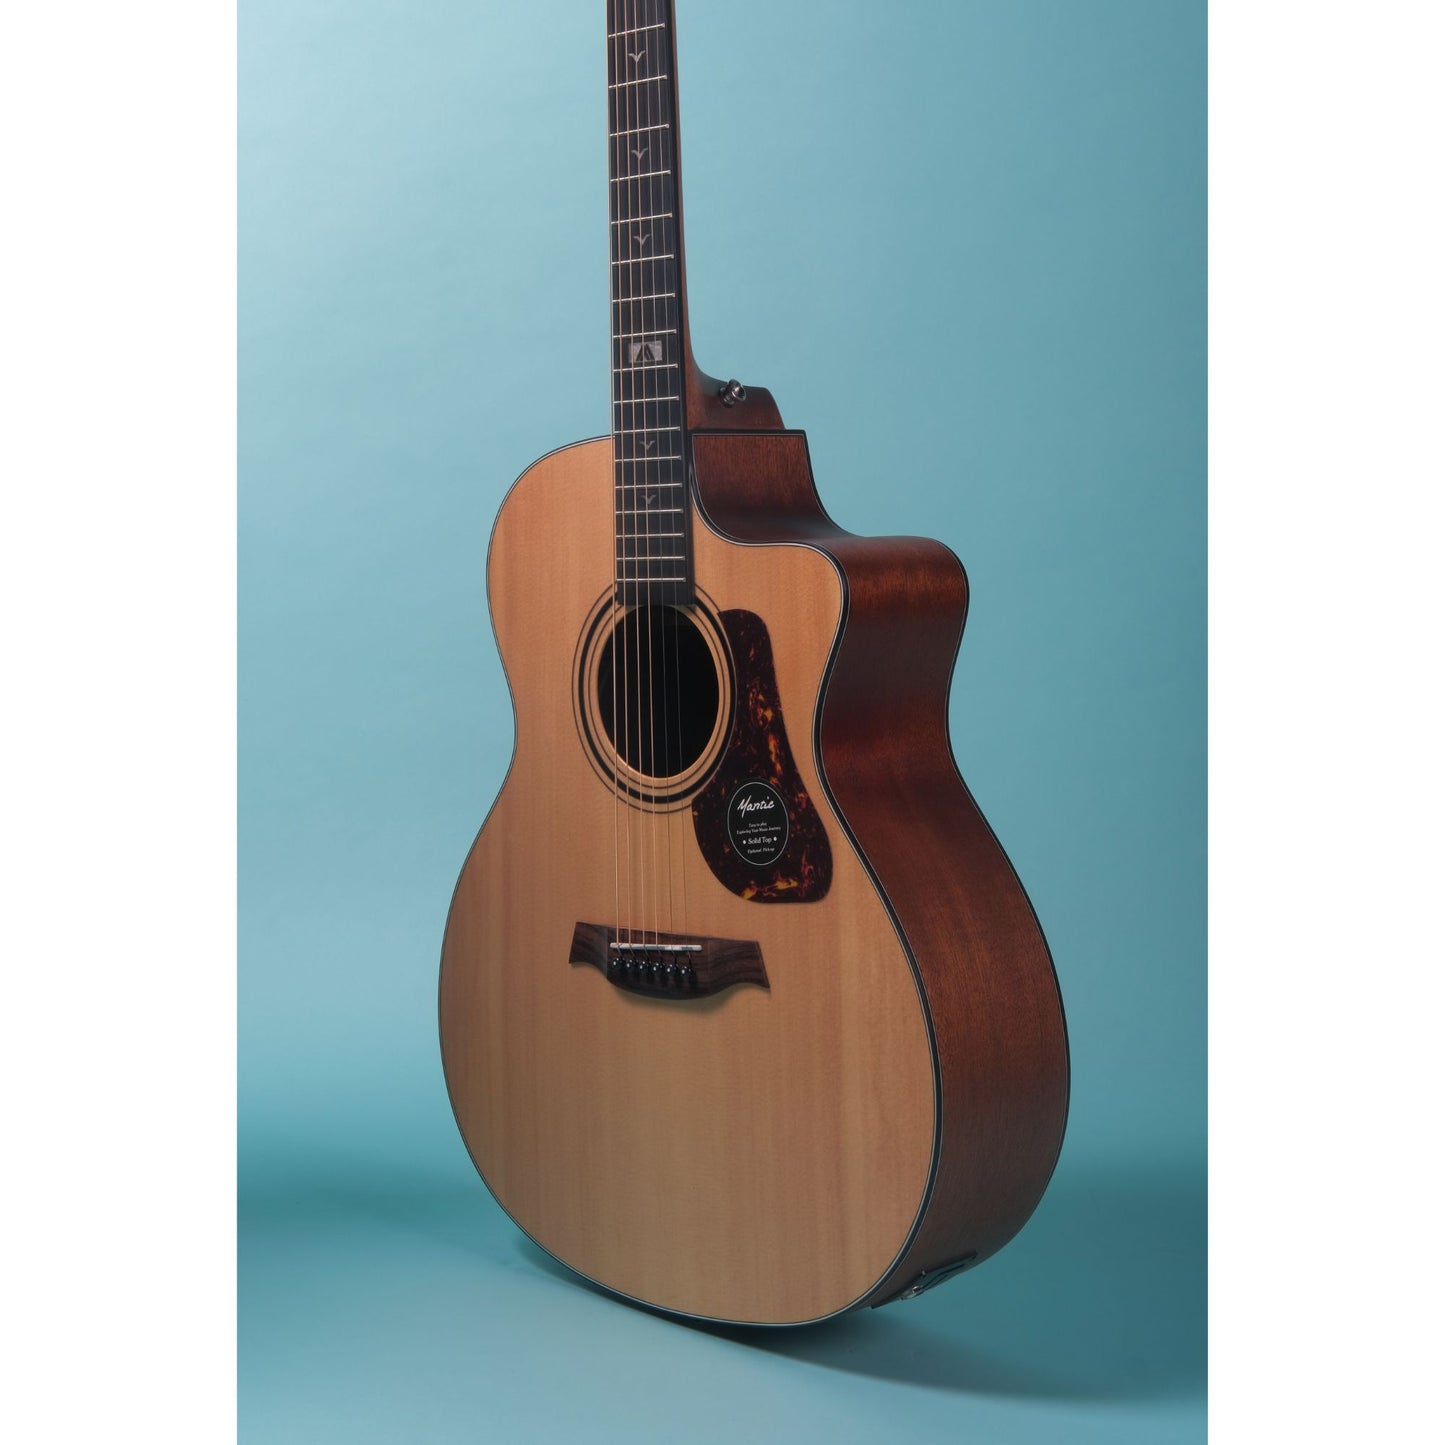 Mantic GT10GC-E Solid Top Semi- Acoustic Guitar with Fishman Electronics - Natural